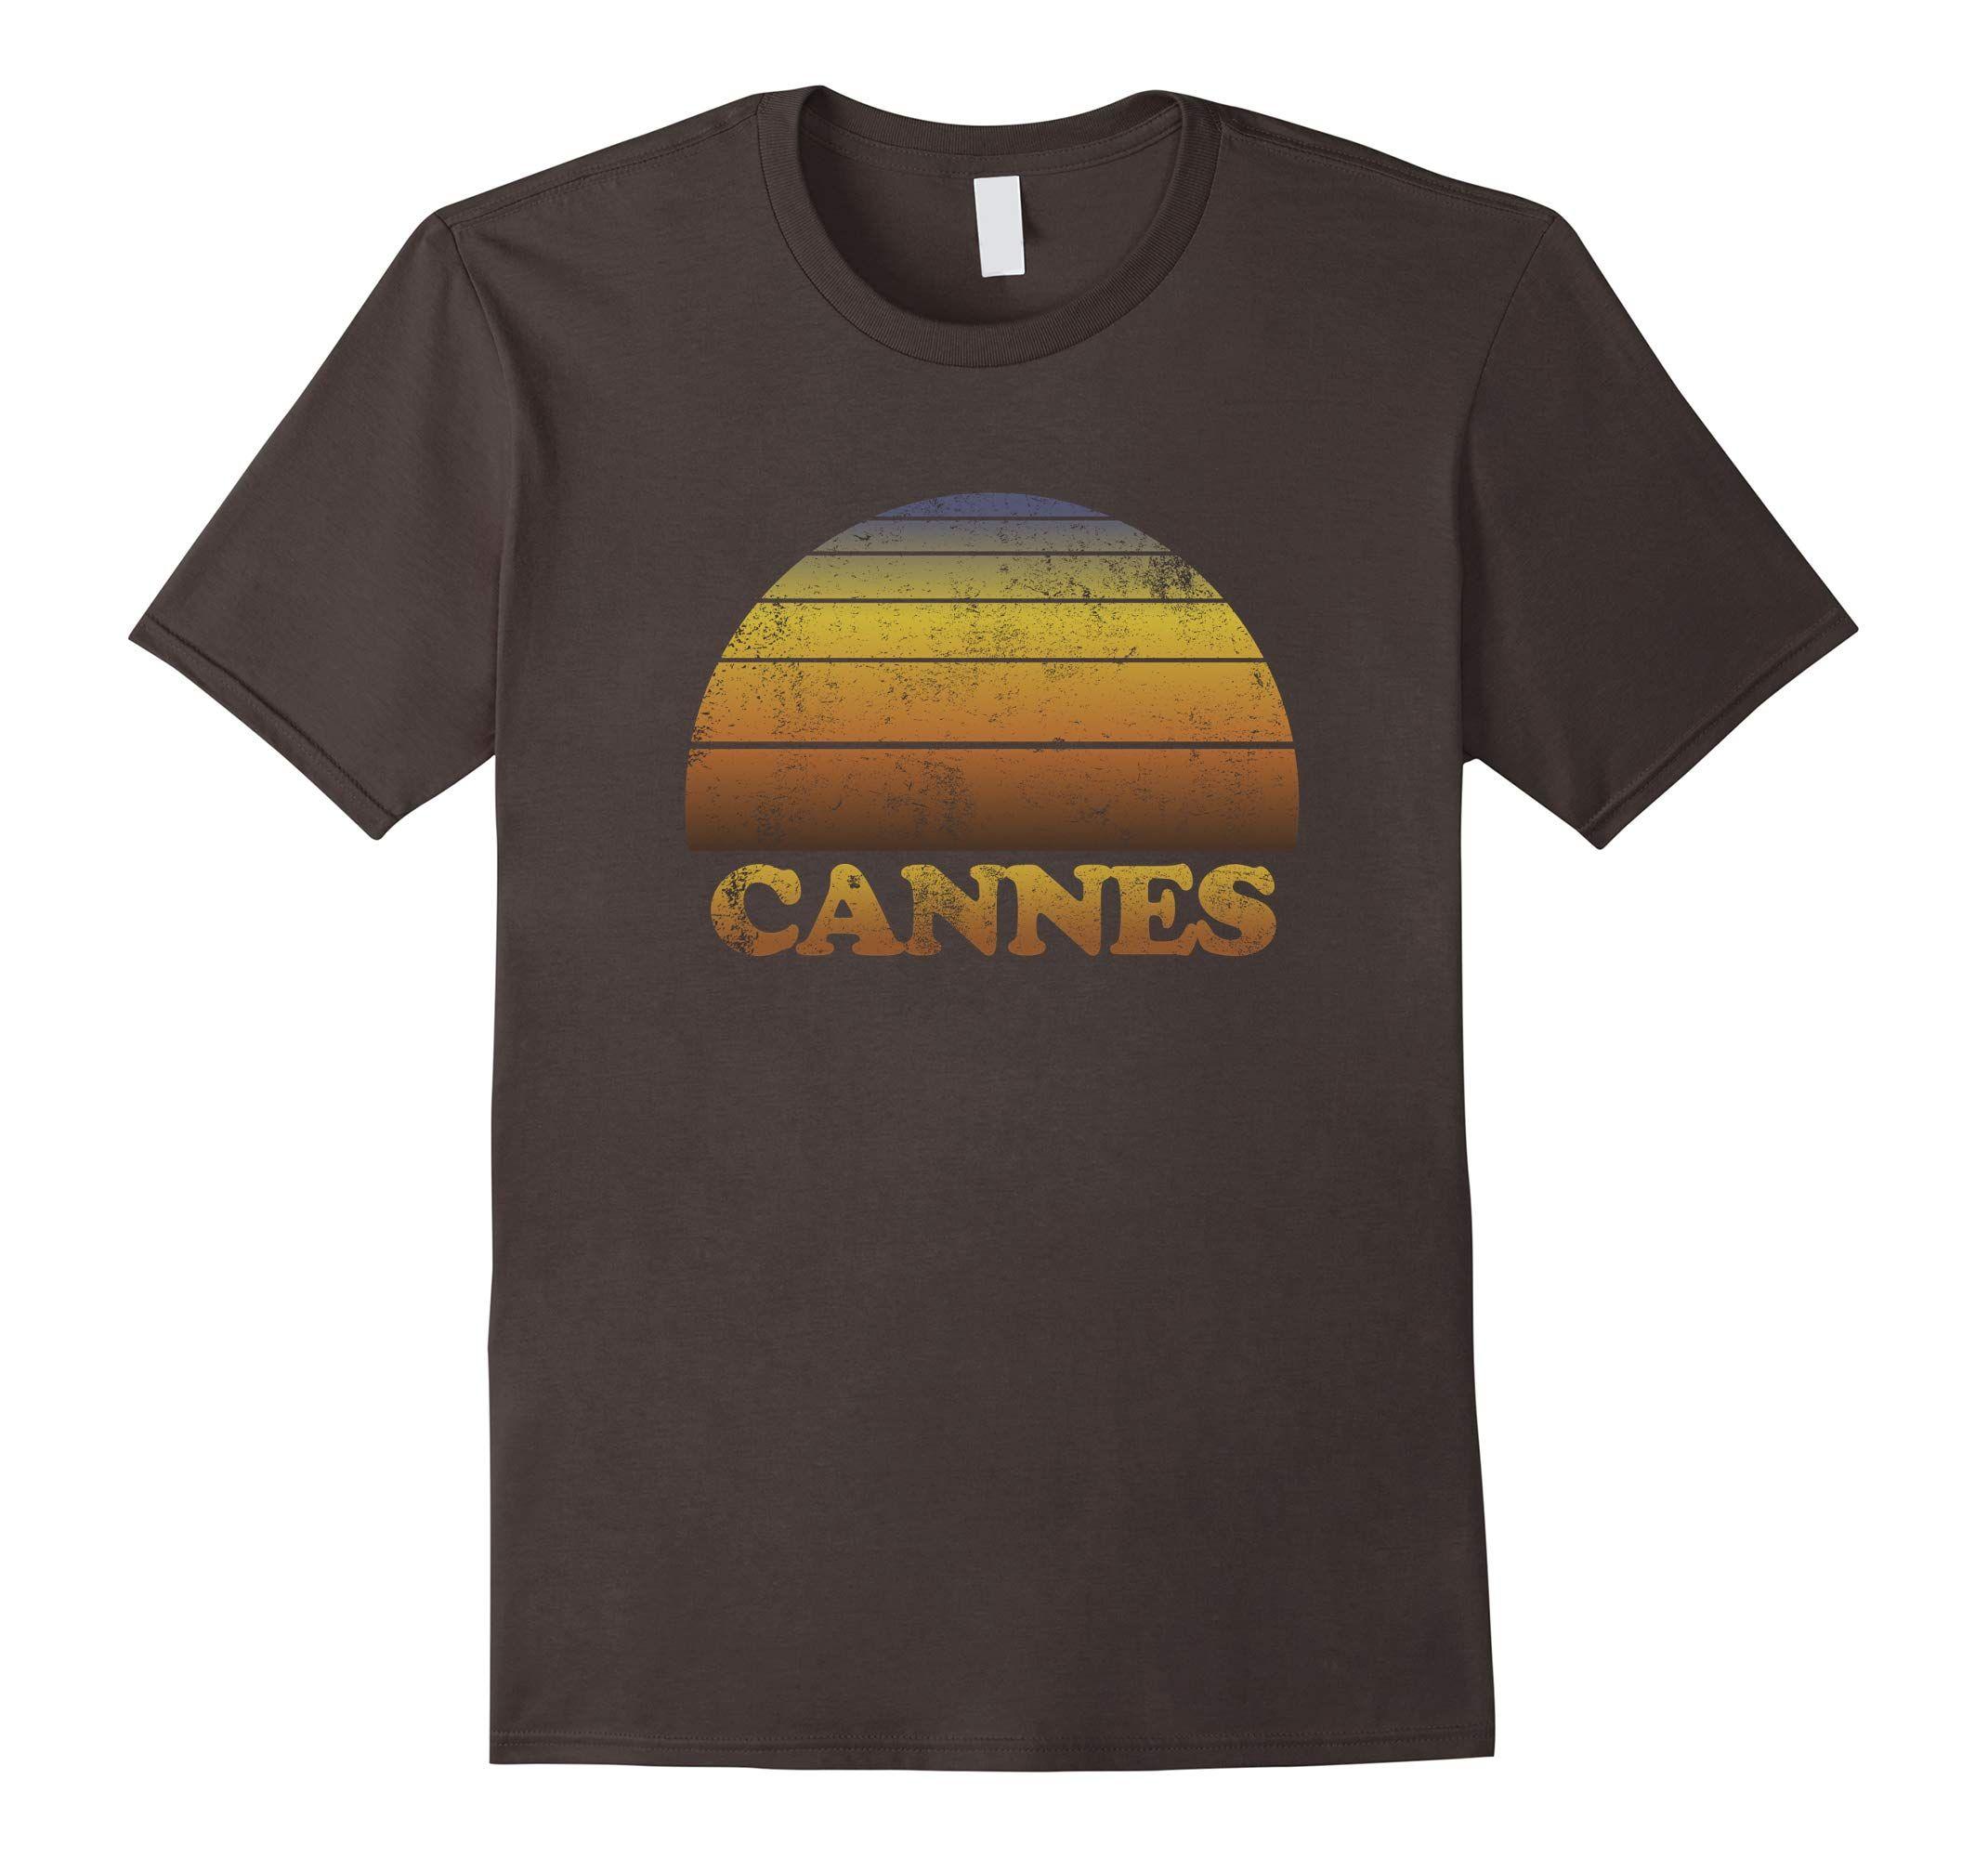 French Apparel Logo - Cannes France T Shirt Clothes Adult Teen French Apparel Ah My Shirt